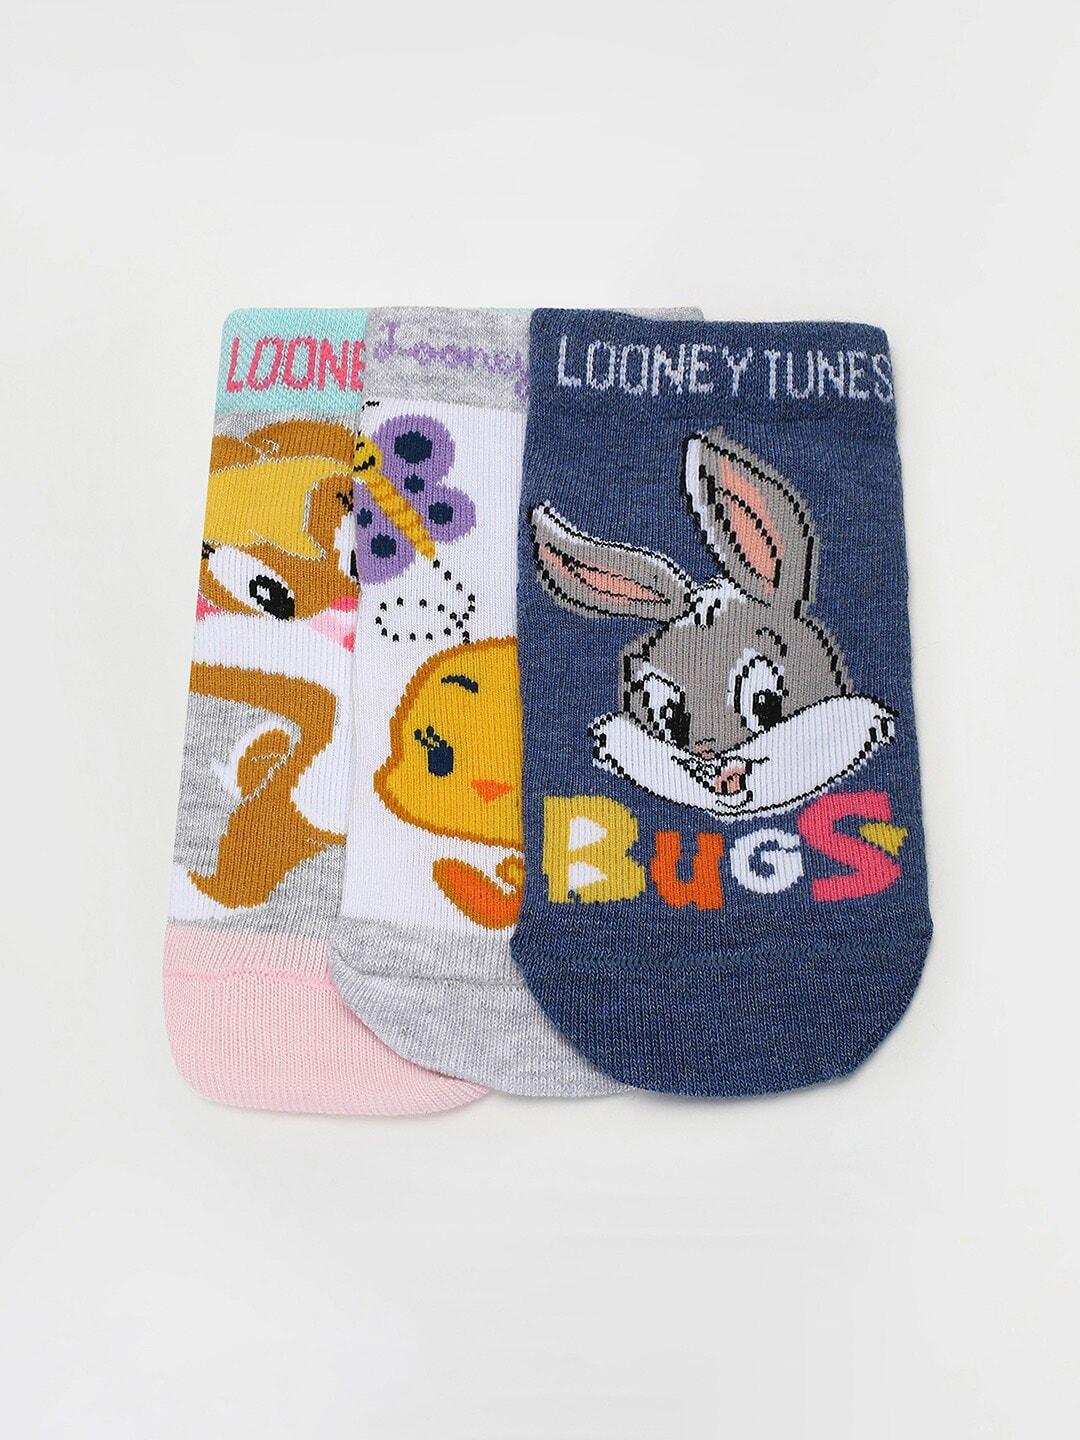 max Girls Pack Of 3 Cartoon Patterned Ankle-Length Socks